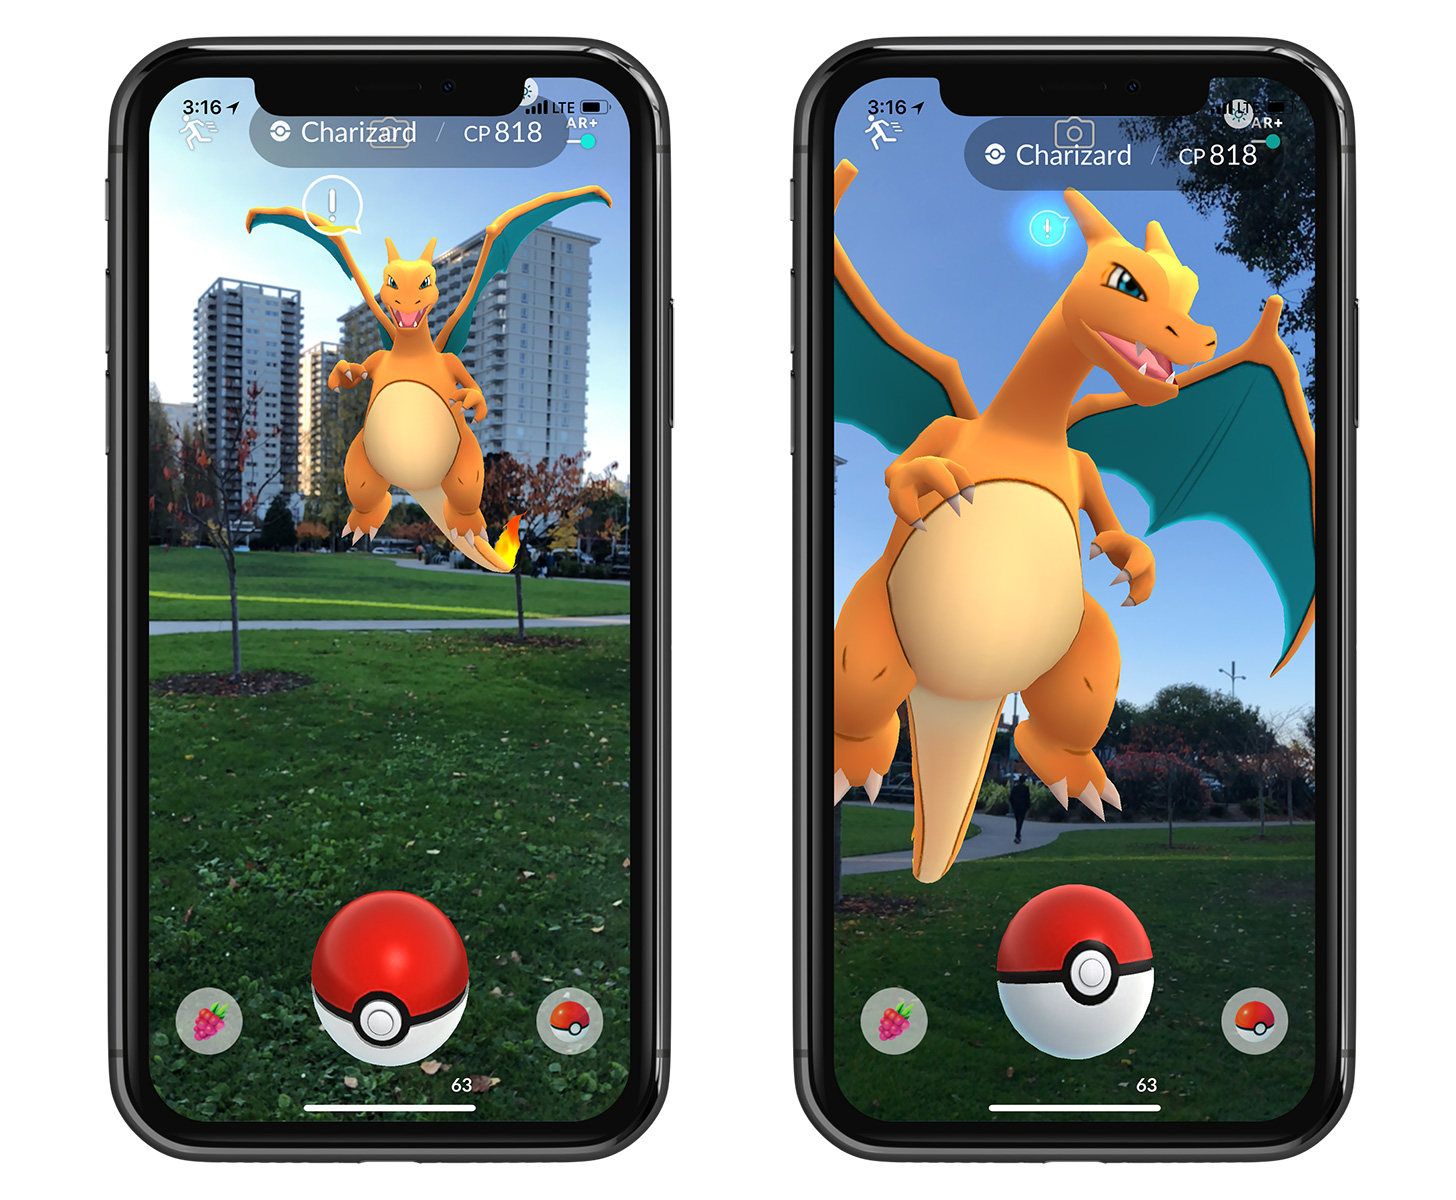 Pokémon Go is known for its augmented reality (AR) feature that make it loo...